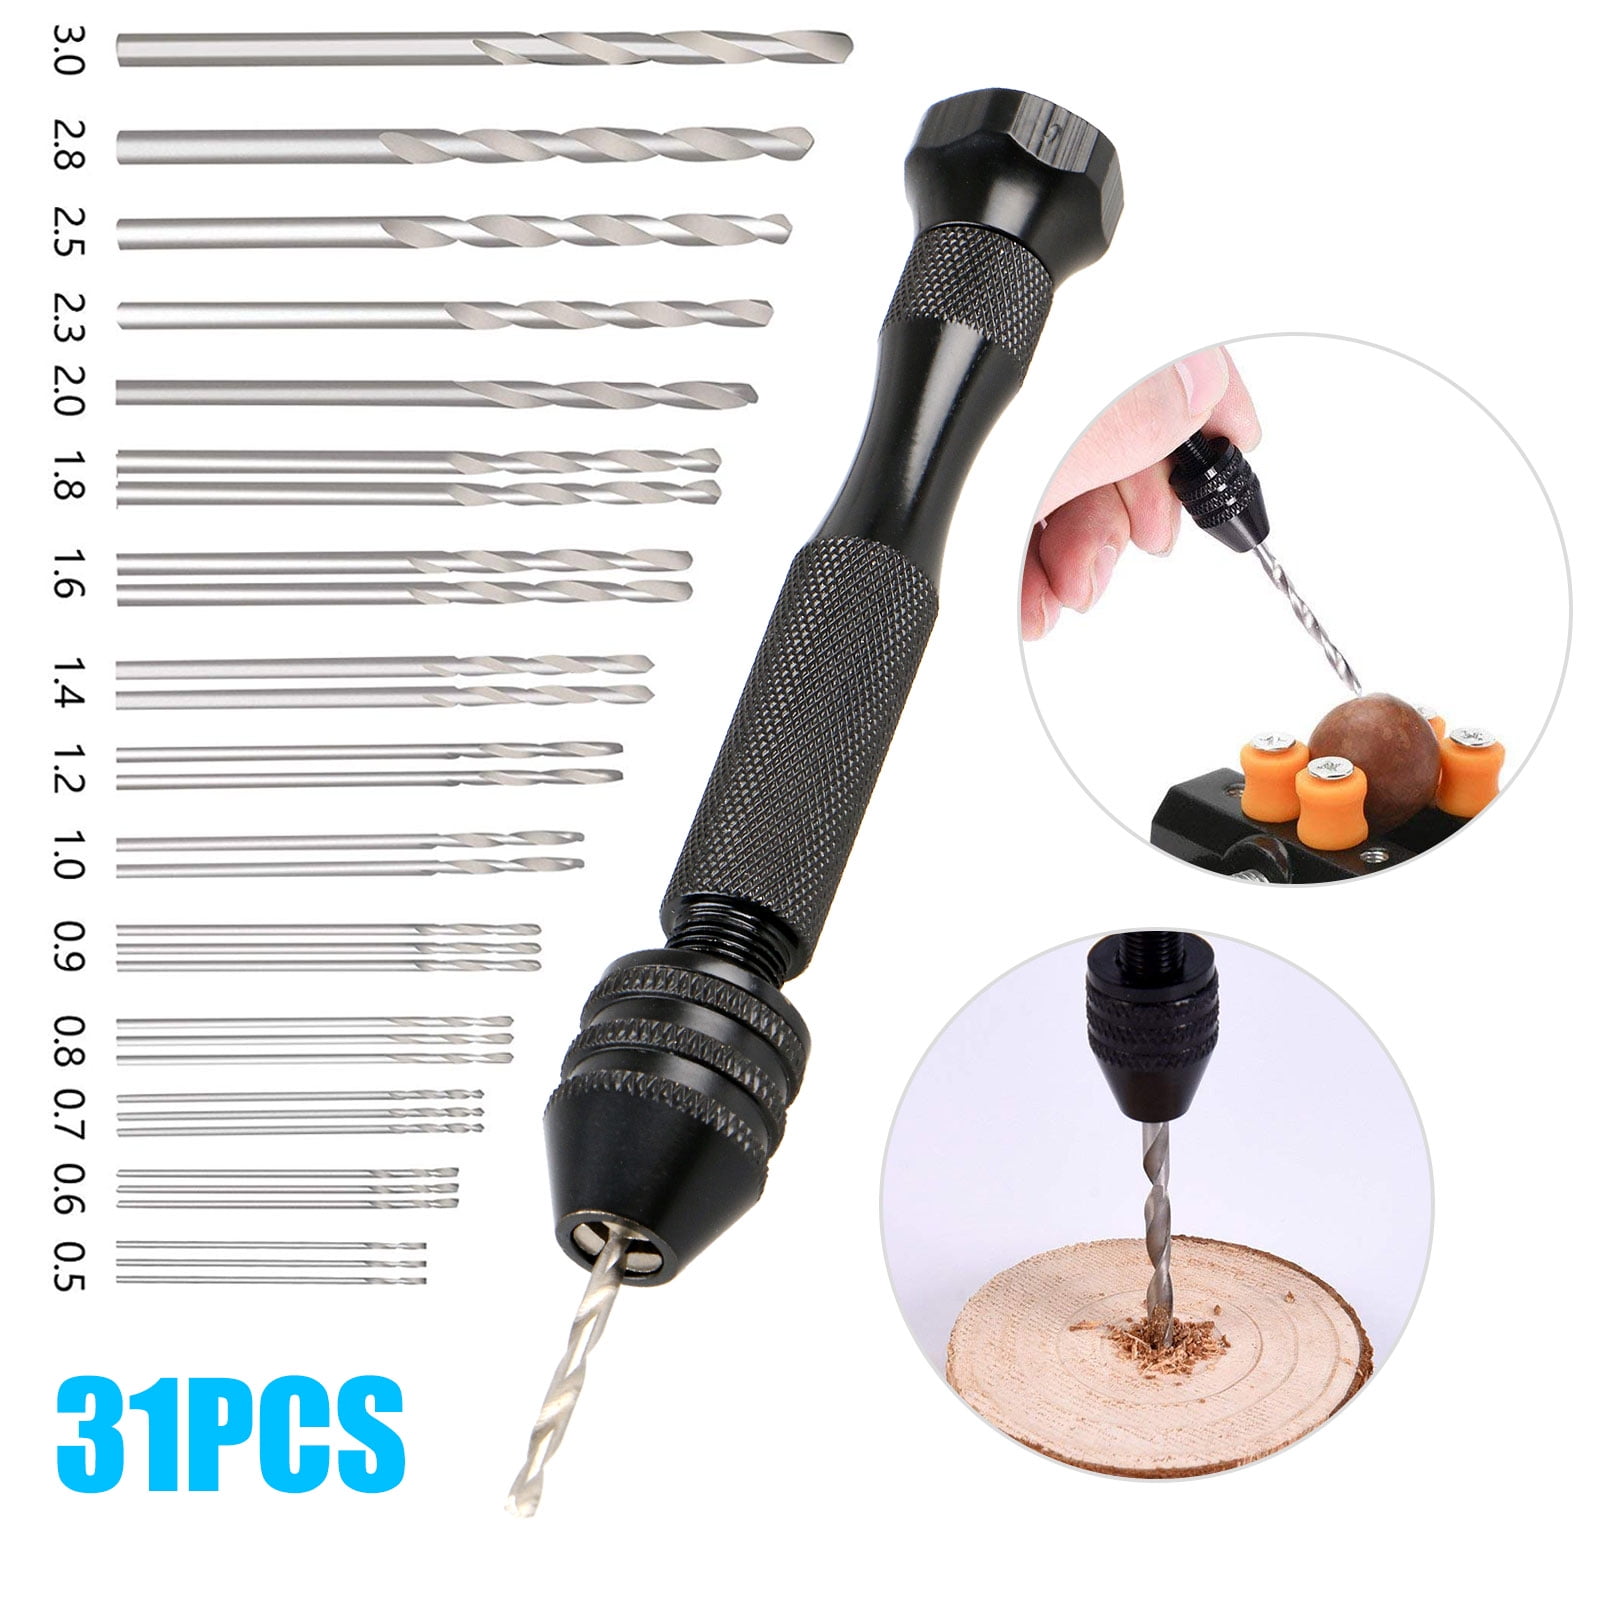 TOOHUI 10 Pcs Mini Pin Vise Hand Drill Bits Micro Twist Drill Bits Set with Precision Hand Pin Vise Rotary Tools for Jewelry Carving Woodworking Plastic 0.8-3.0mm 